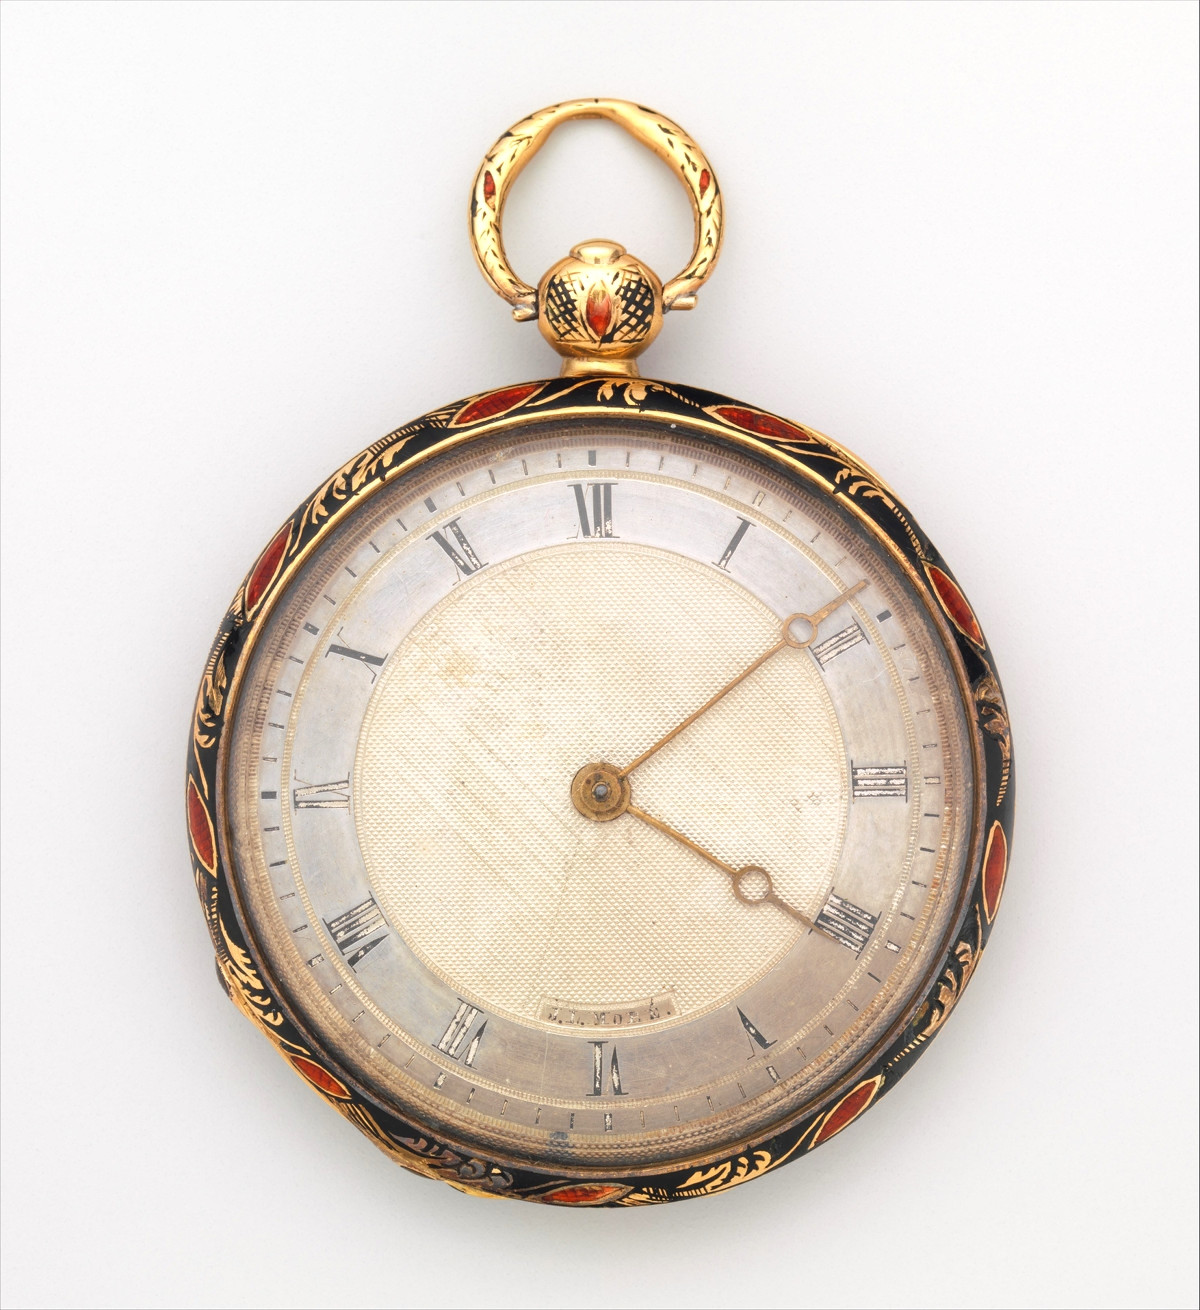 1830. Watch. Swiss, Geneva. Case of gold and enamel, with floral design; jeweled movement, with cylinder escapement. metmuseum